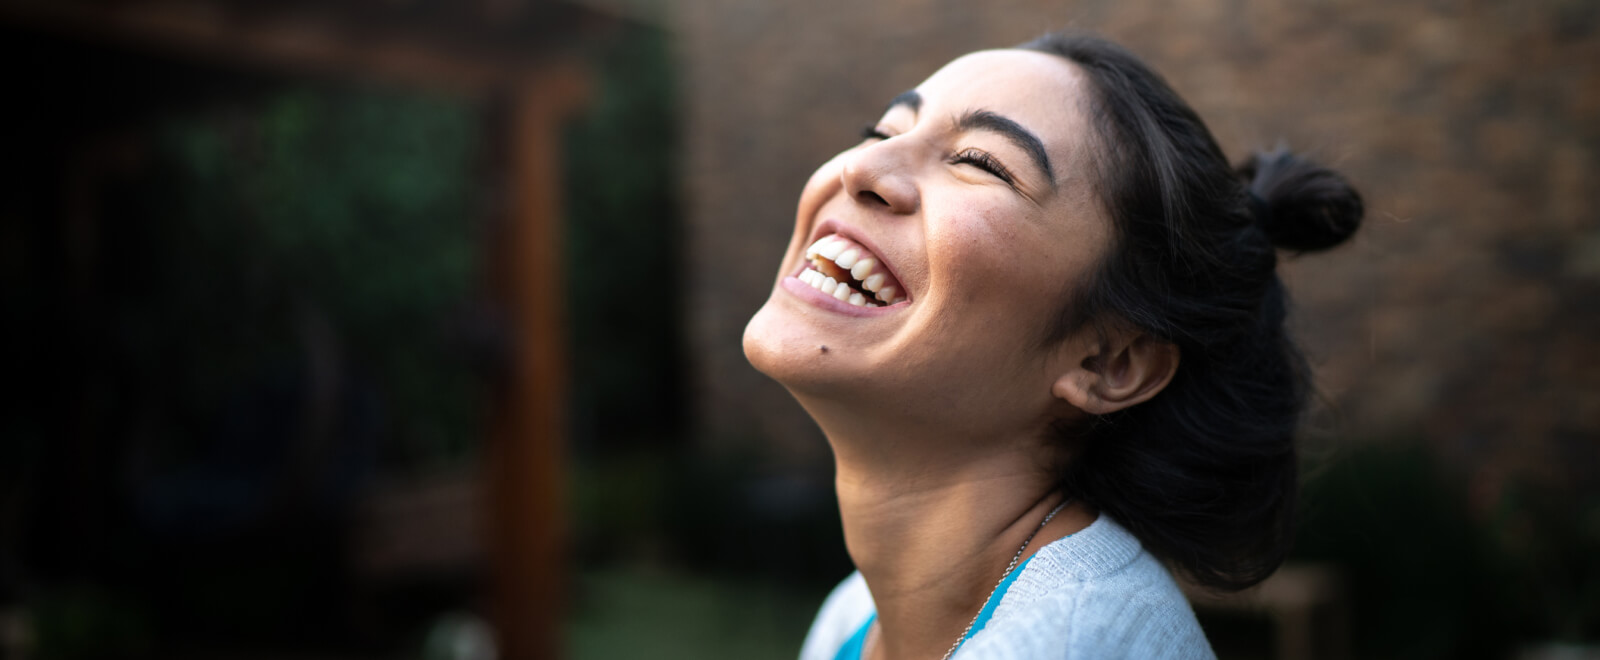 Young woman laughing outdoors.